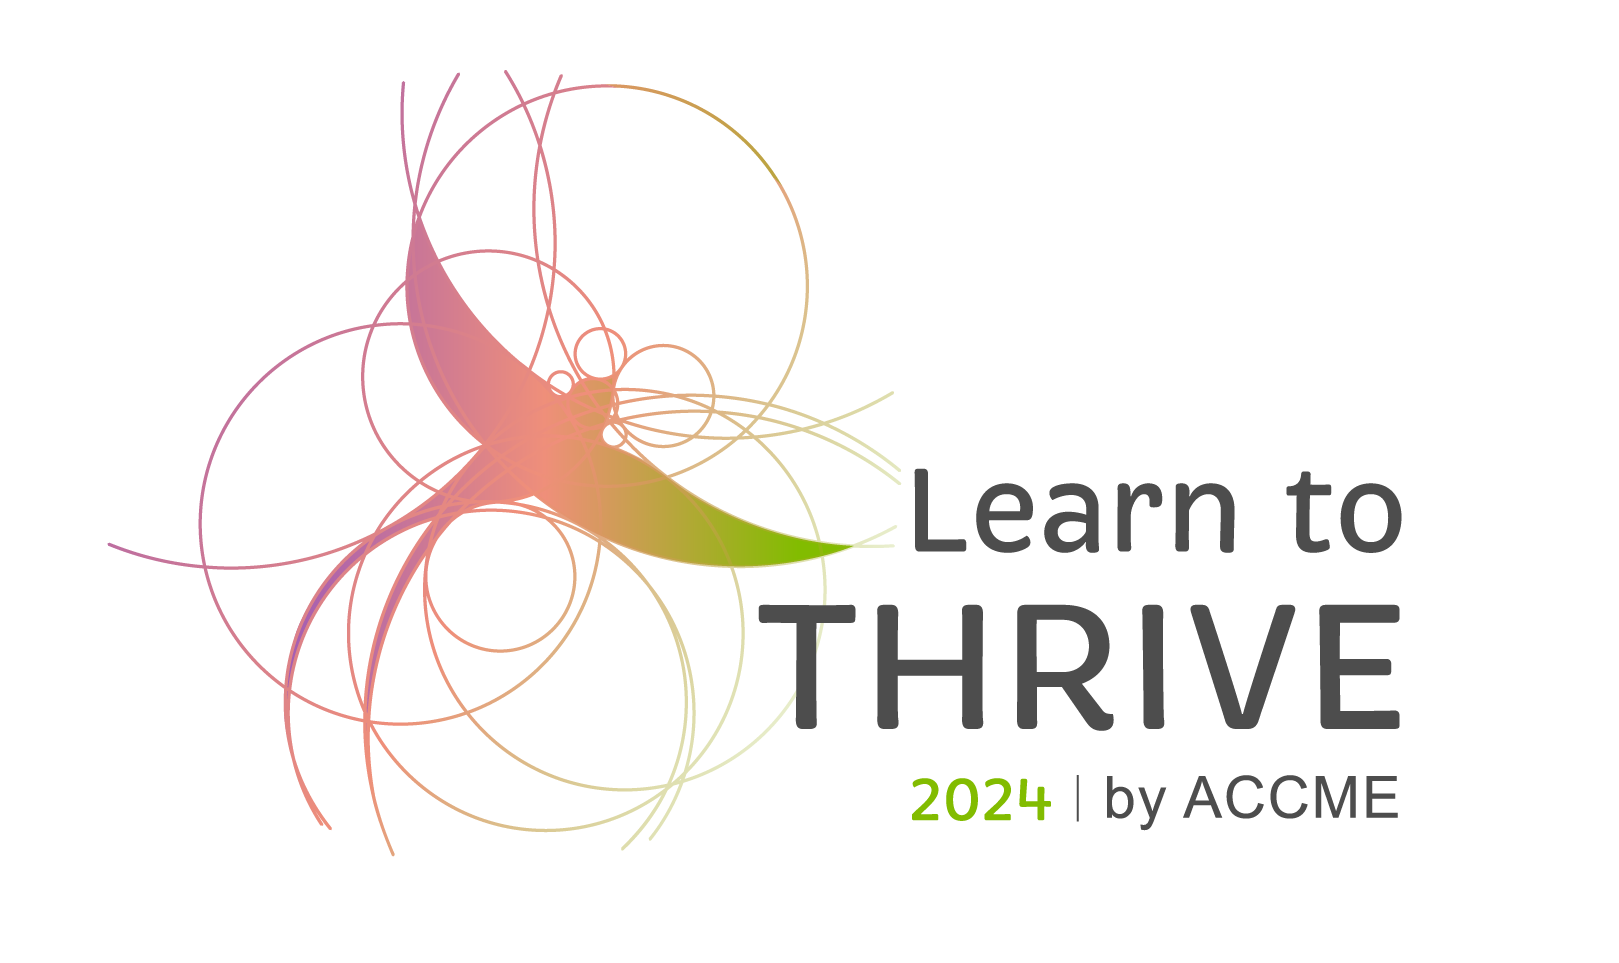 learn to thrive 2024 logo